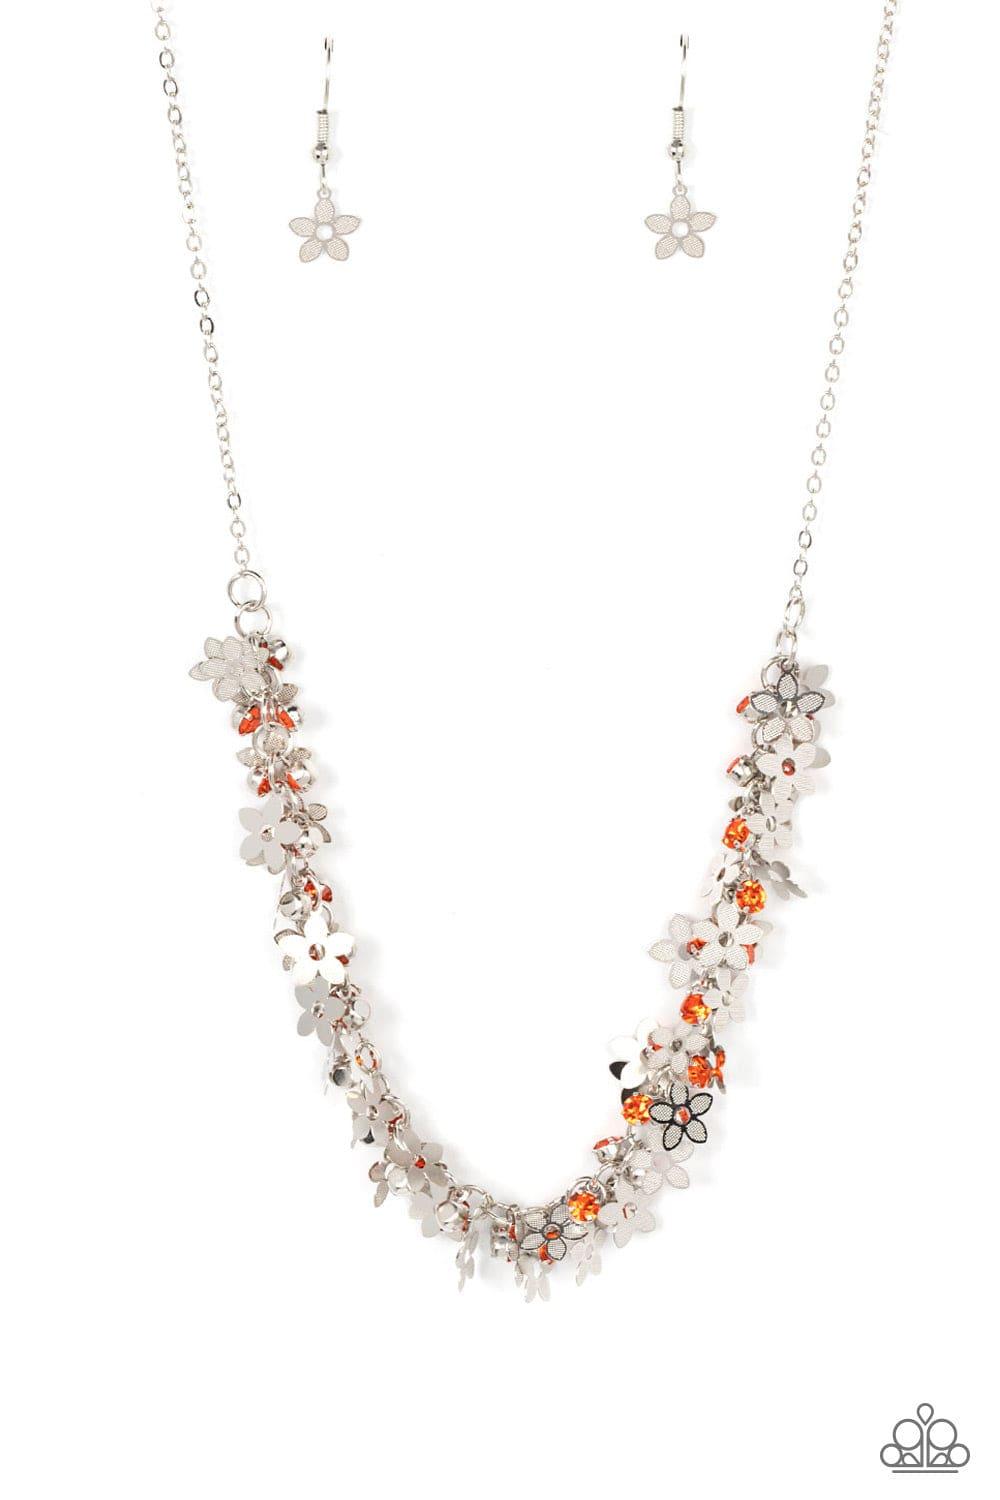 Paparazzi Accessories - Fearlessly Floral - Orange Necklace - Bling by JessieK